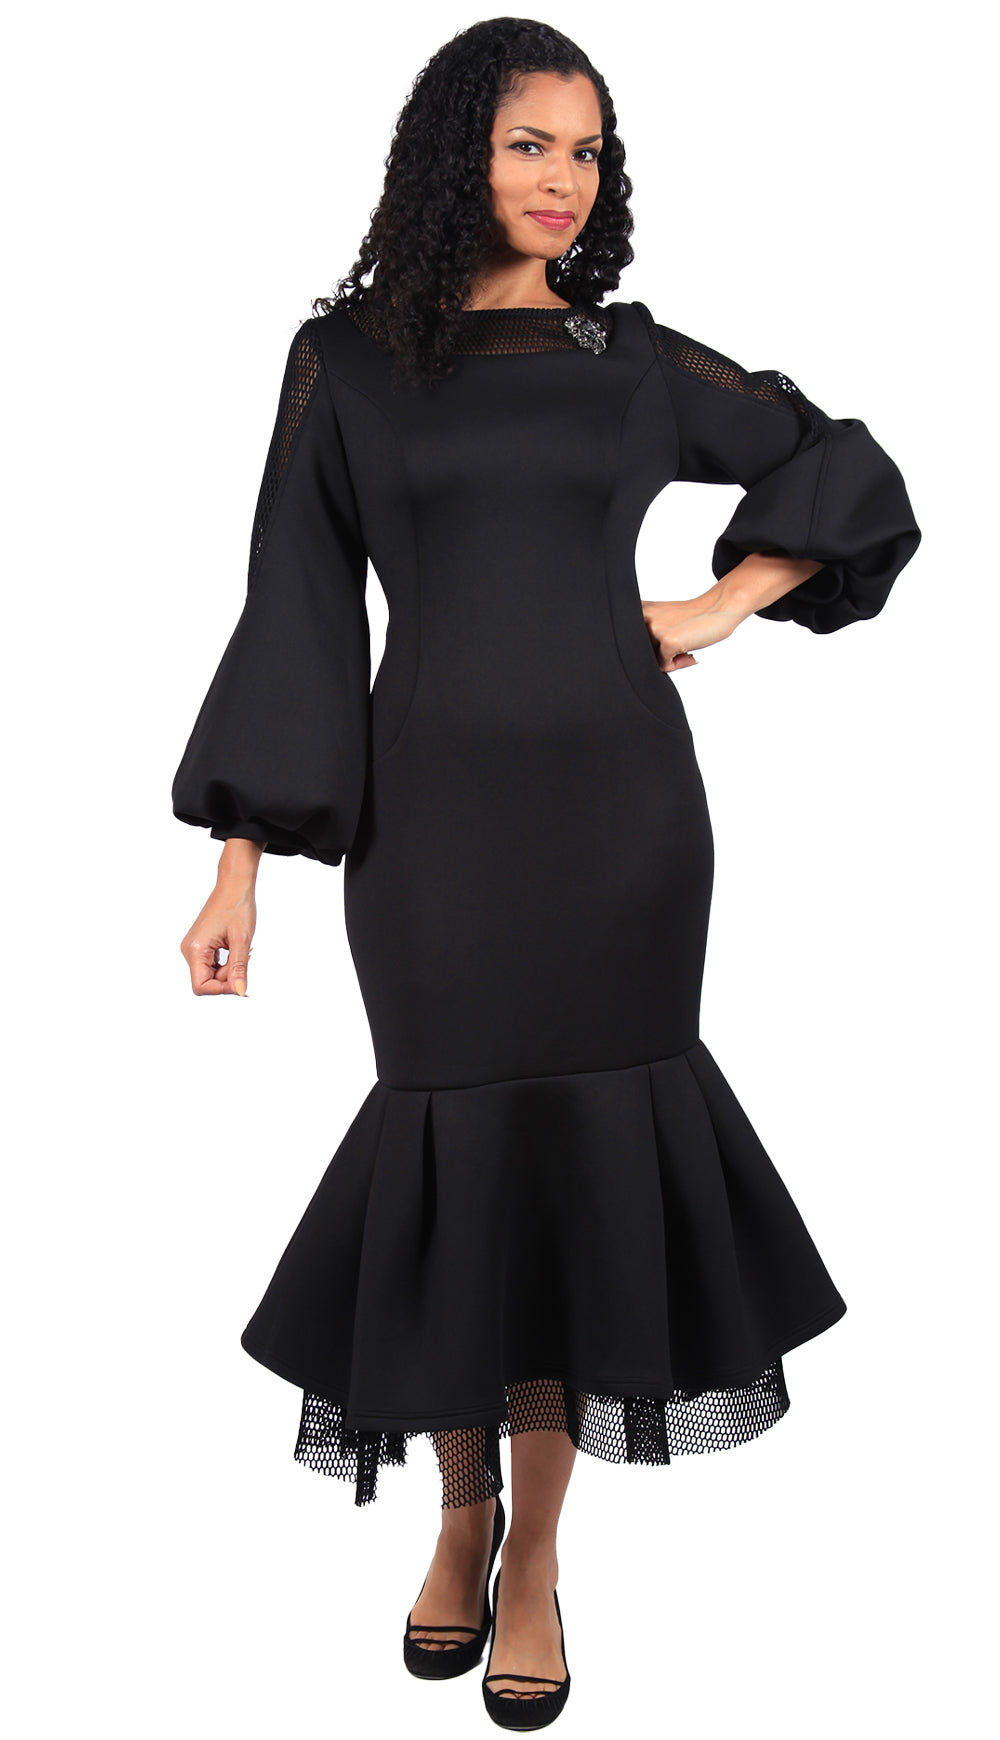 Diana Couture Church Dress 8659-Black - Church Suits For Less